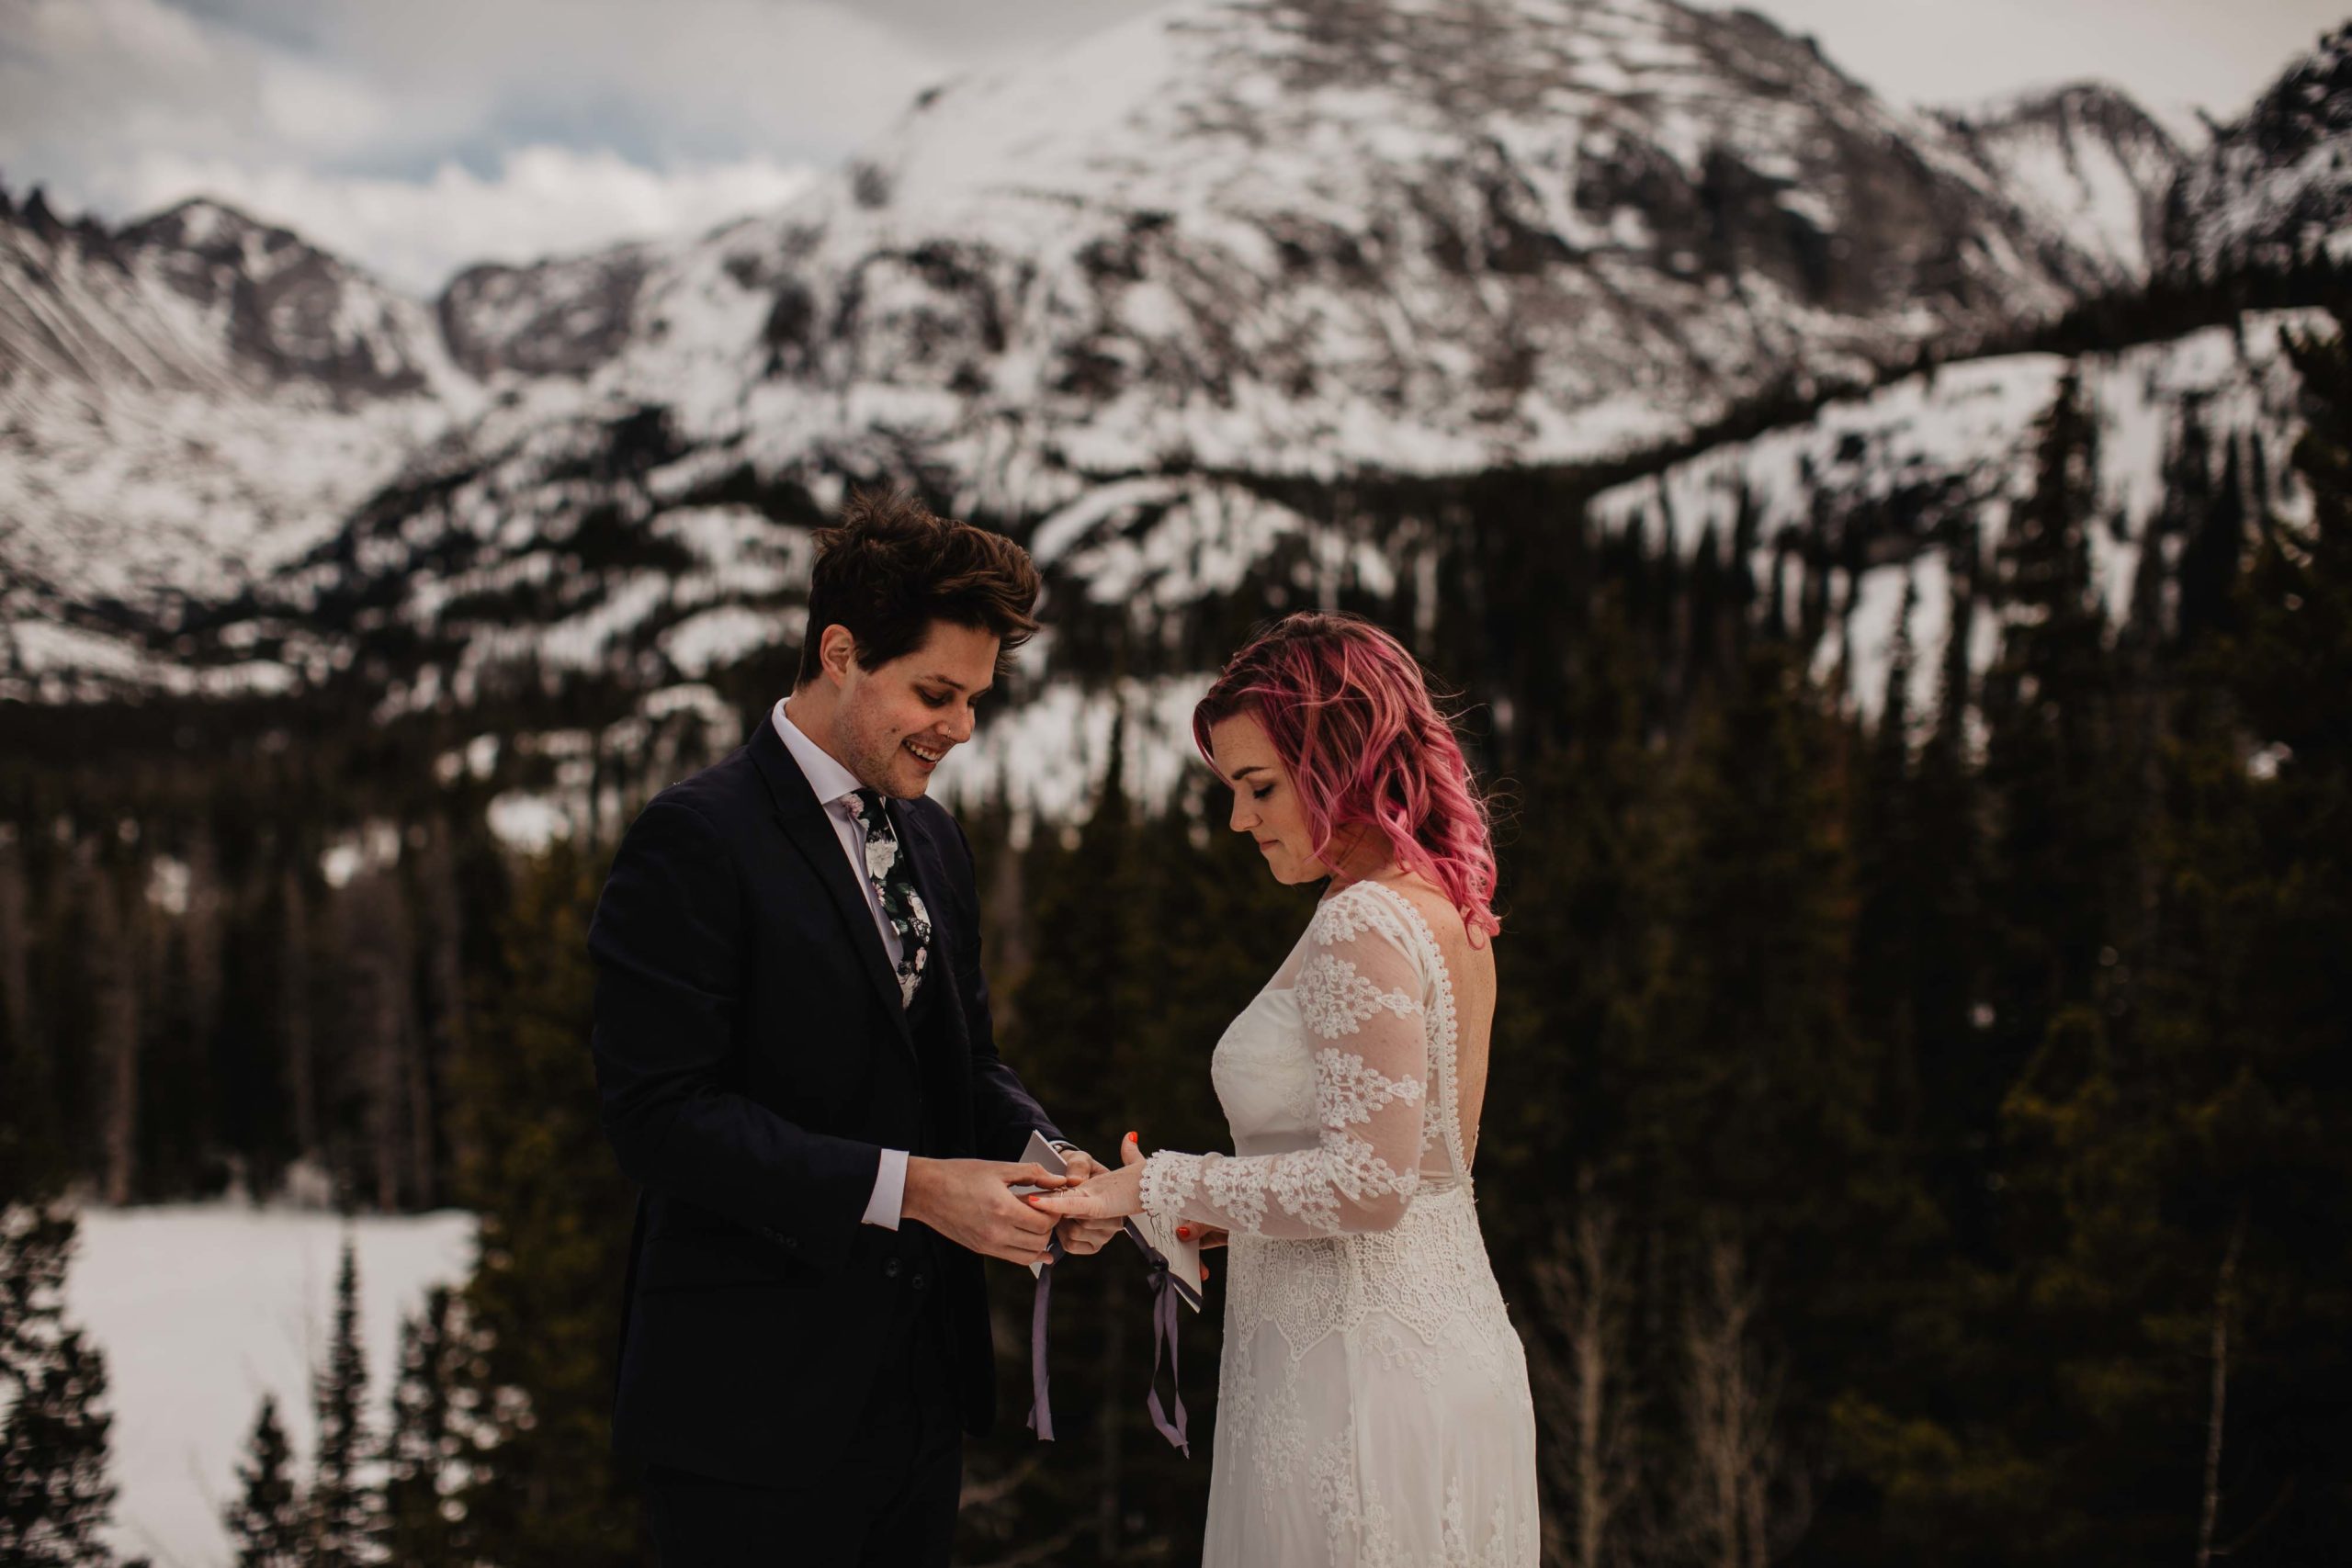 how to plan a leave no trace elopement to minimize impact